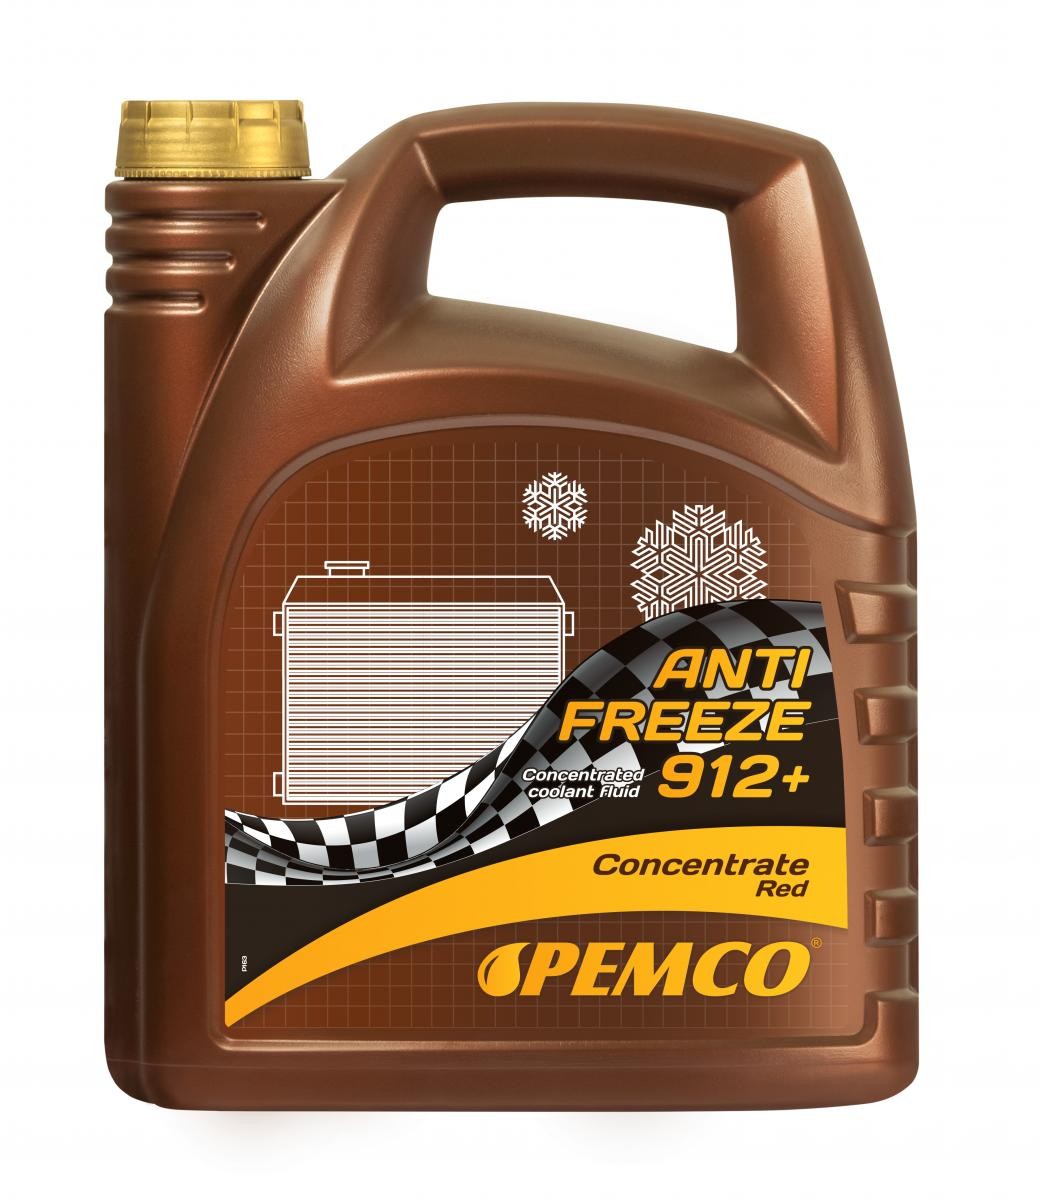 PEMCO Antifreeze 912+, Concentrate PM0912C-5 Antifreeze G12 red, 5l, -38(50/50)